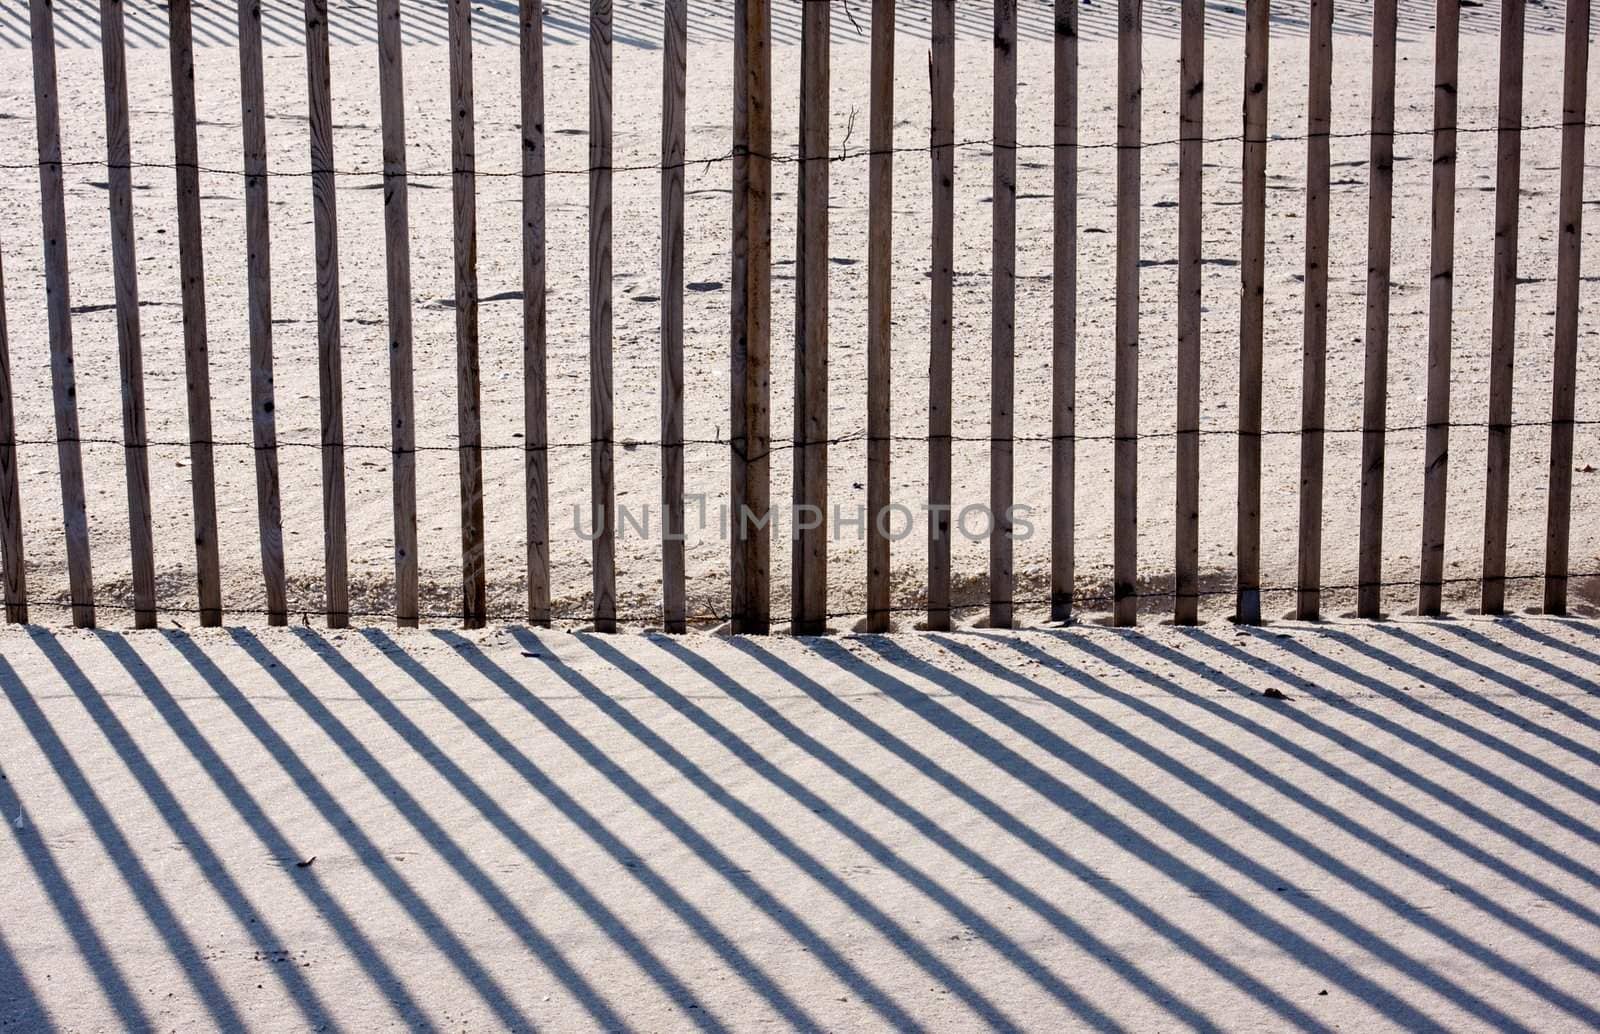 An abstract image of a fence on a beach with diagnol shadows